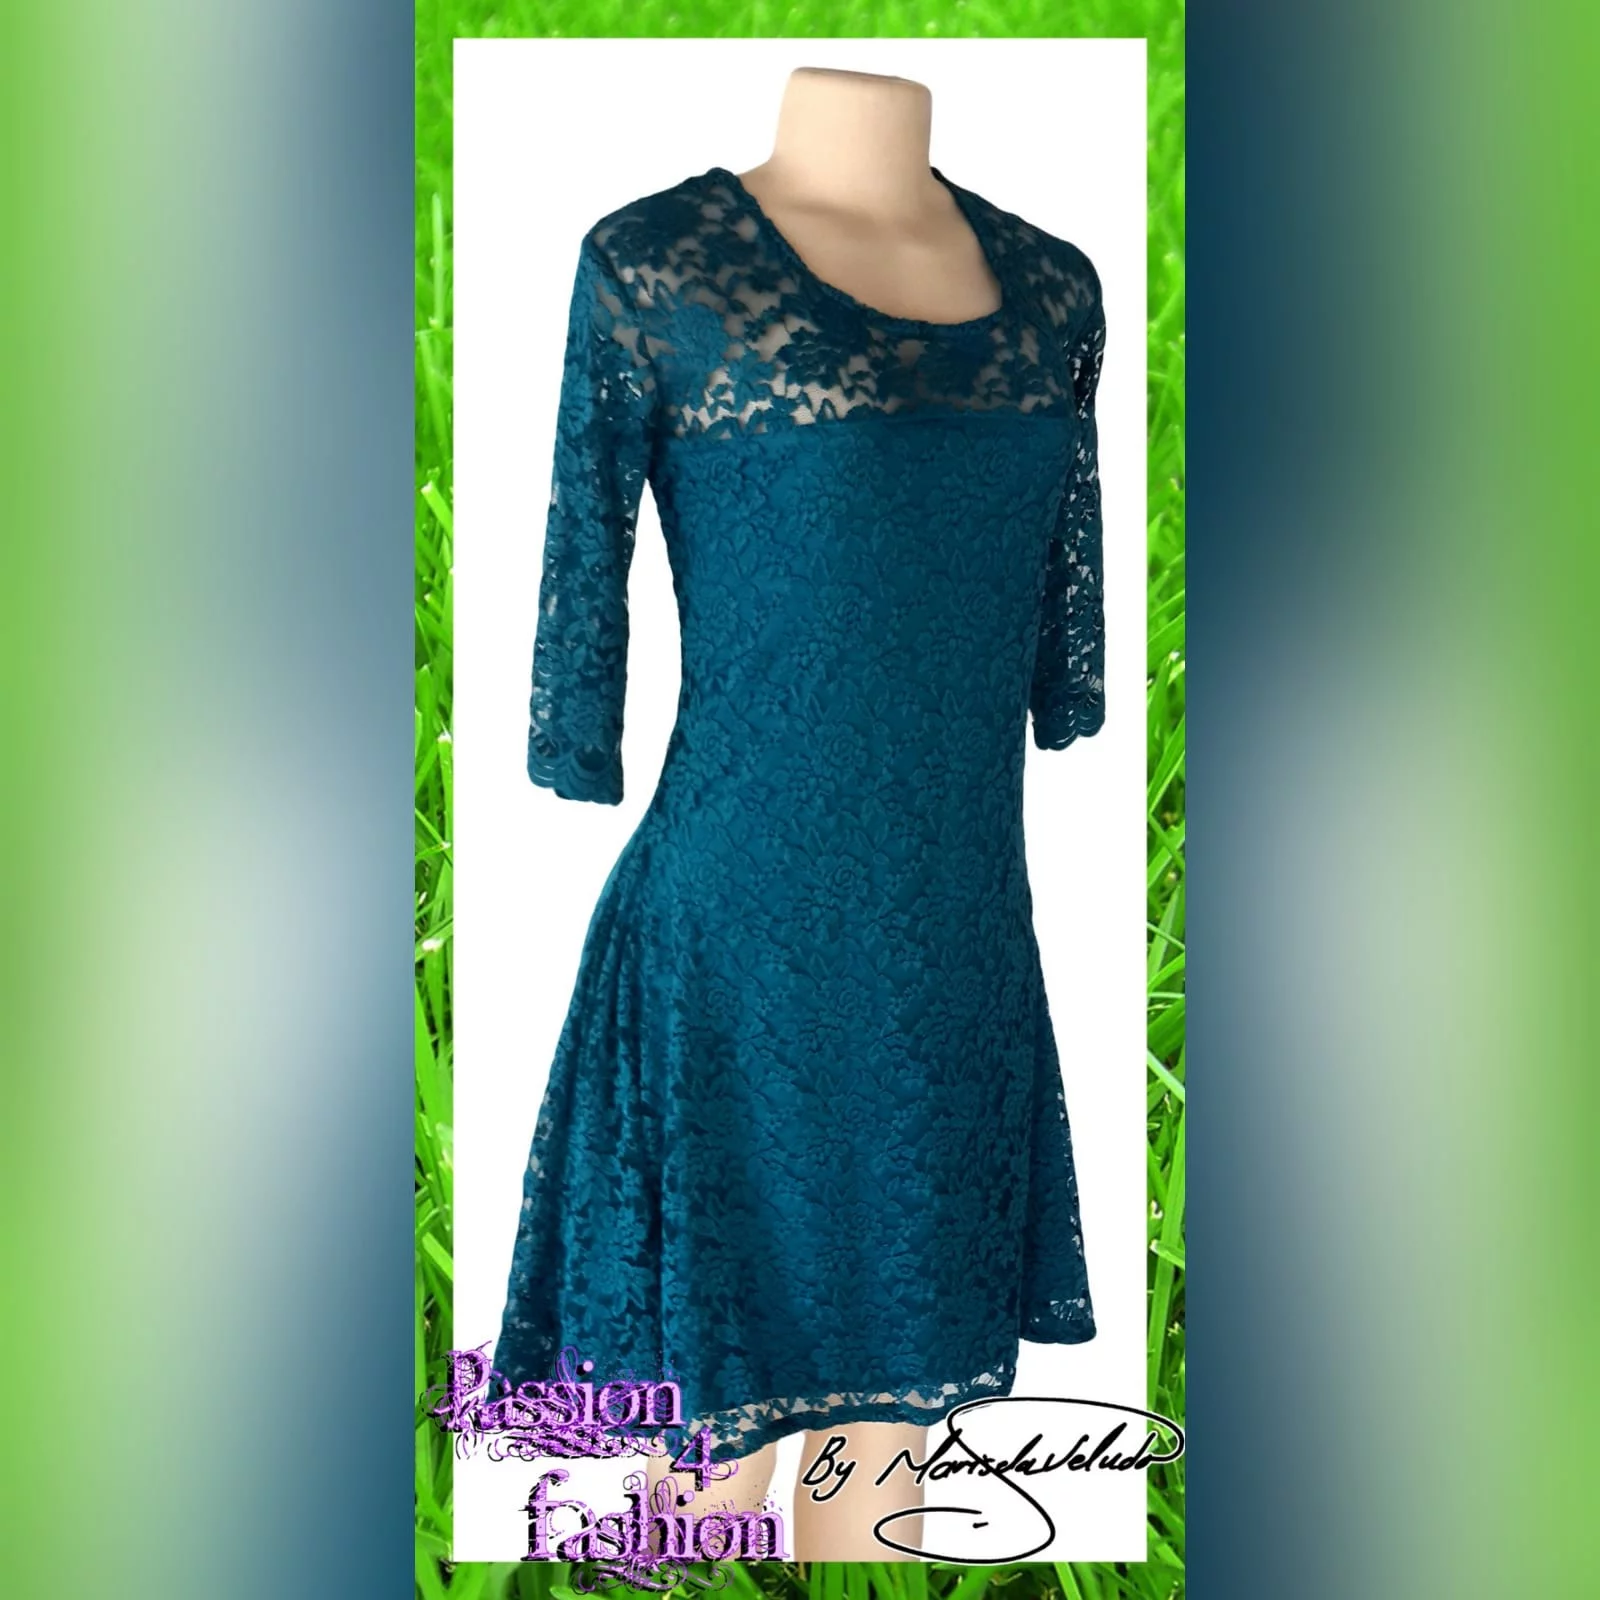 Turquoise blue smart casual knee length lace dress 1 turquoise blue smart casual knee length lace dress, with sheer lace neckline and sleeves.